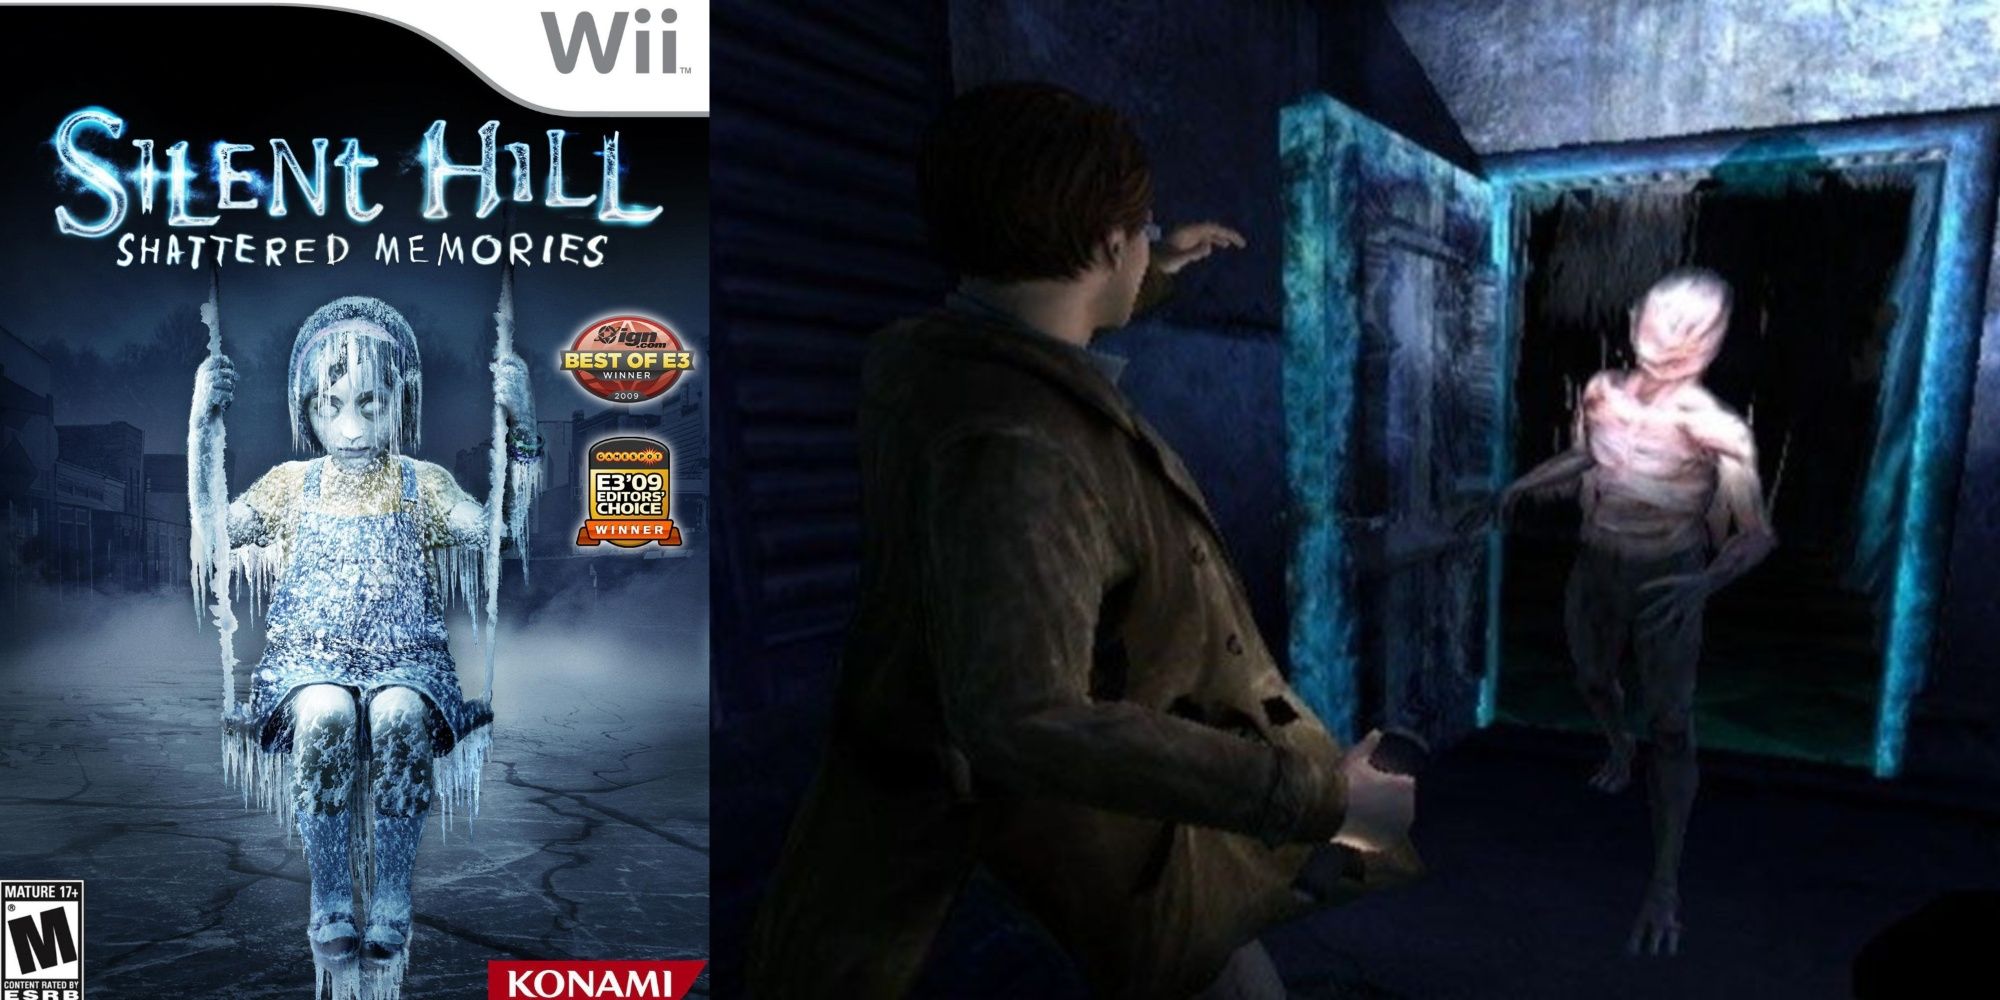 A split-image of the Wii artwork for Silent Hill: Shattered Memories and Harry Mason encountering a scary enemy walking through a door.